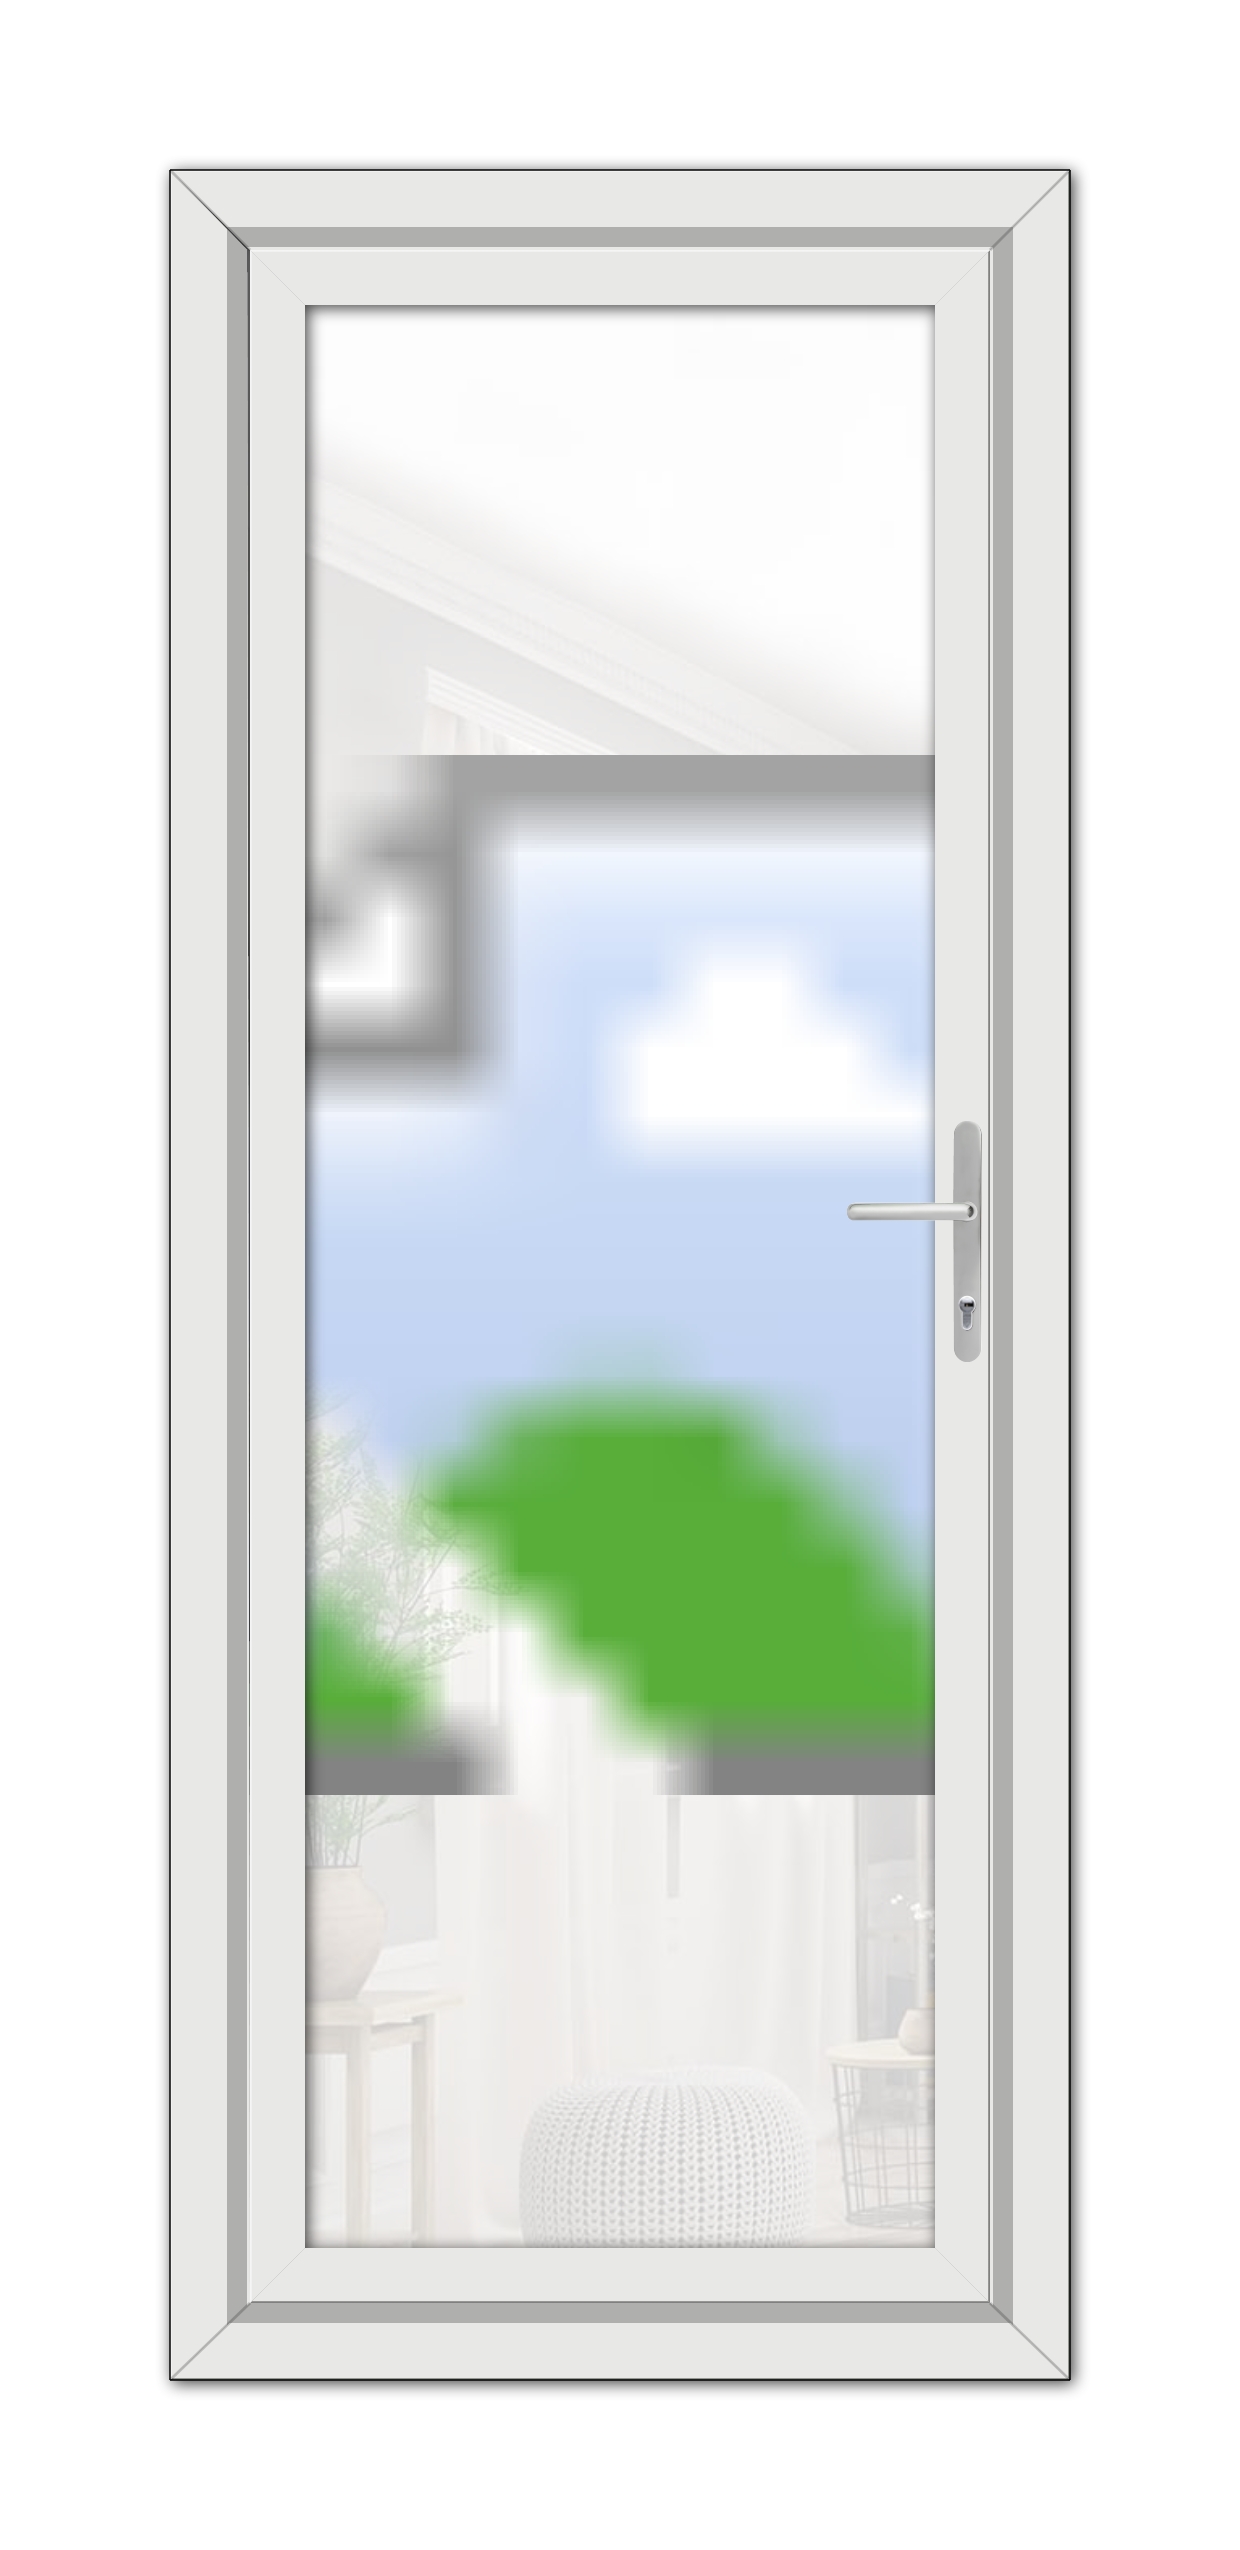 A modern grey Reims solid uPVC door with a blurred view of an outdoor scene, showing hints of greenery and a blue sky.